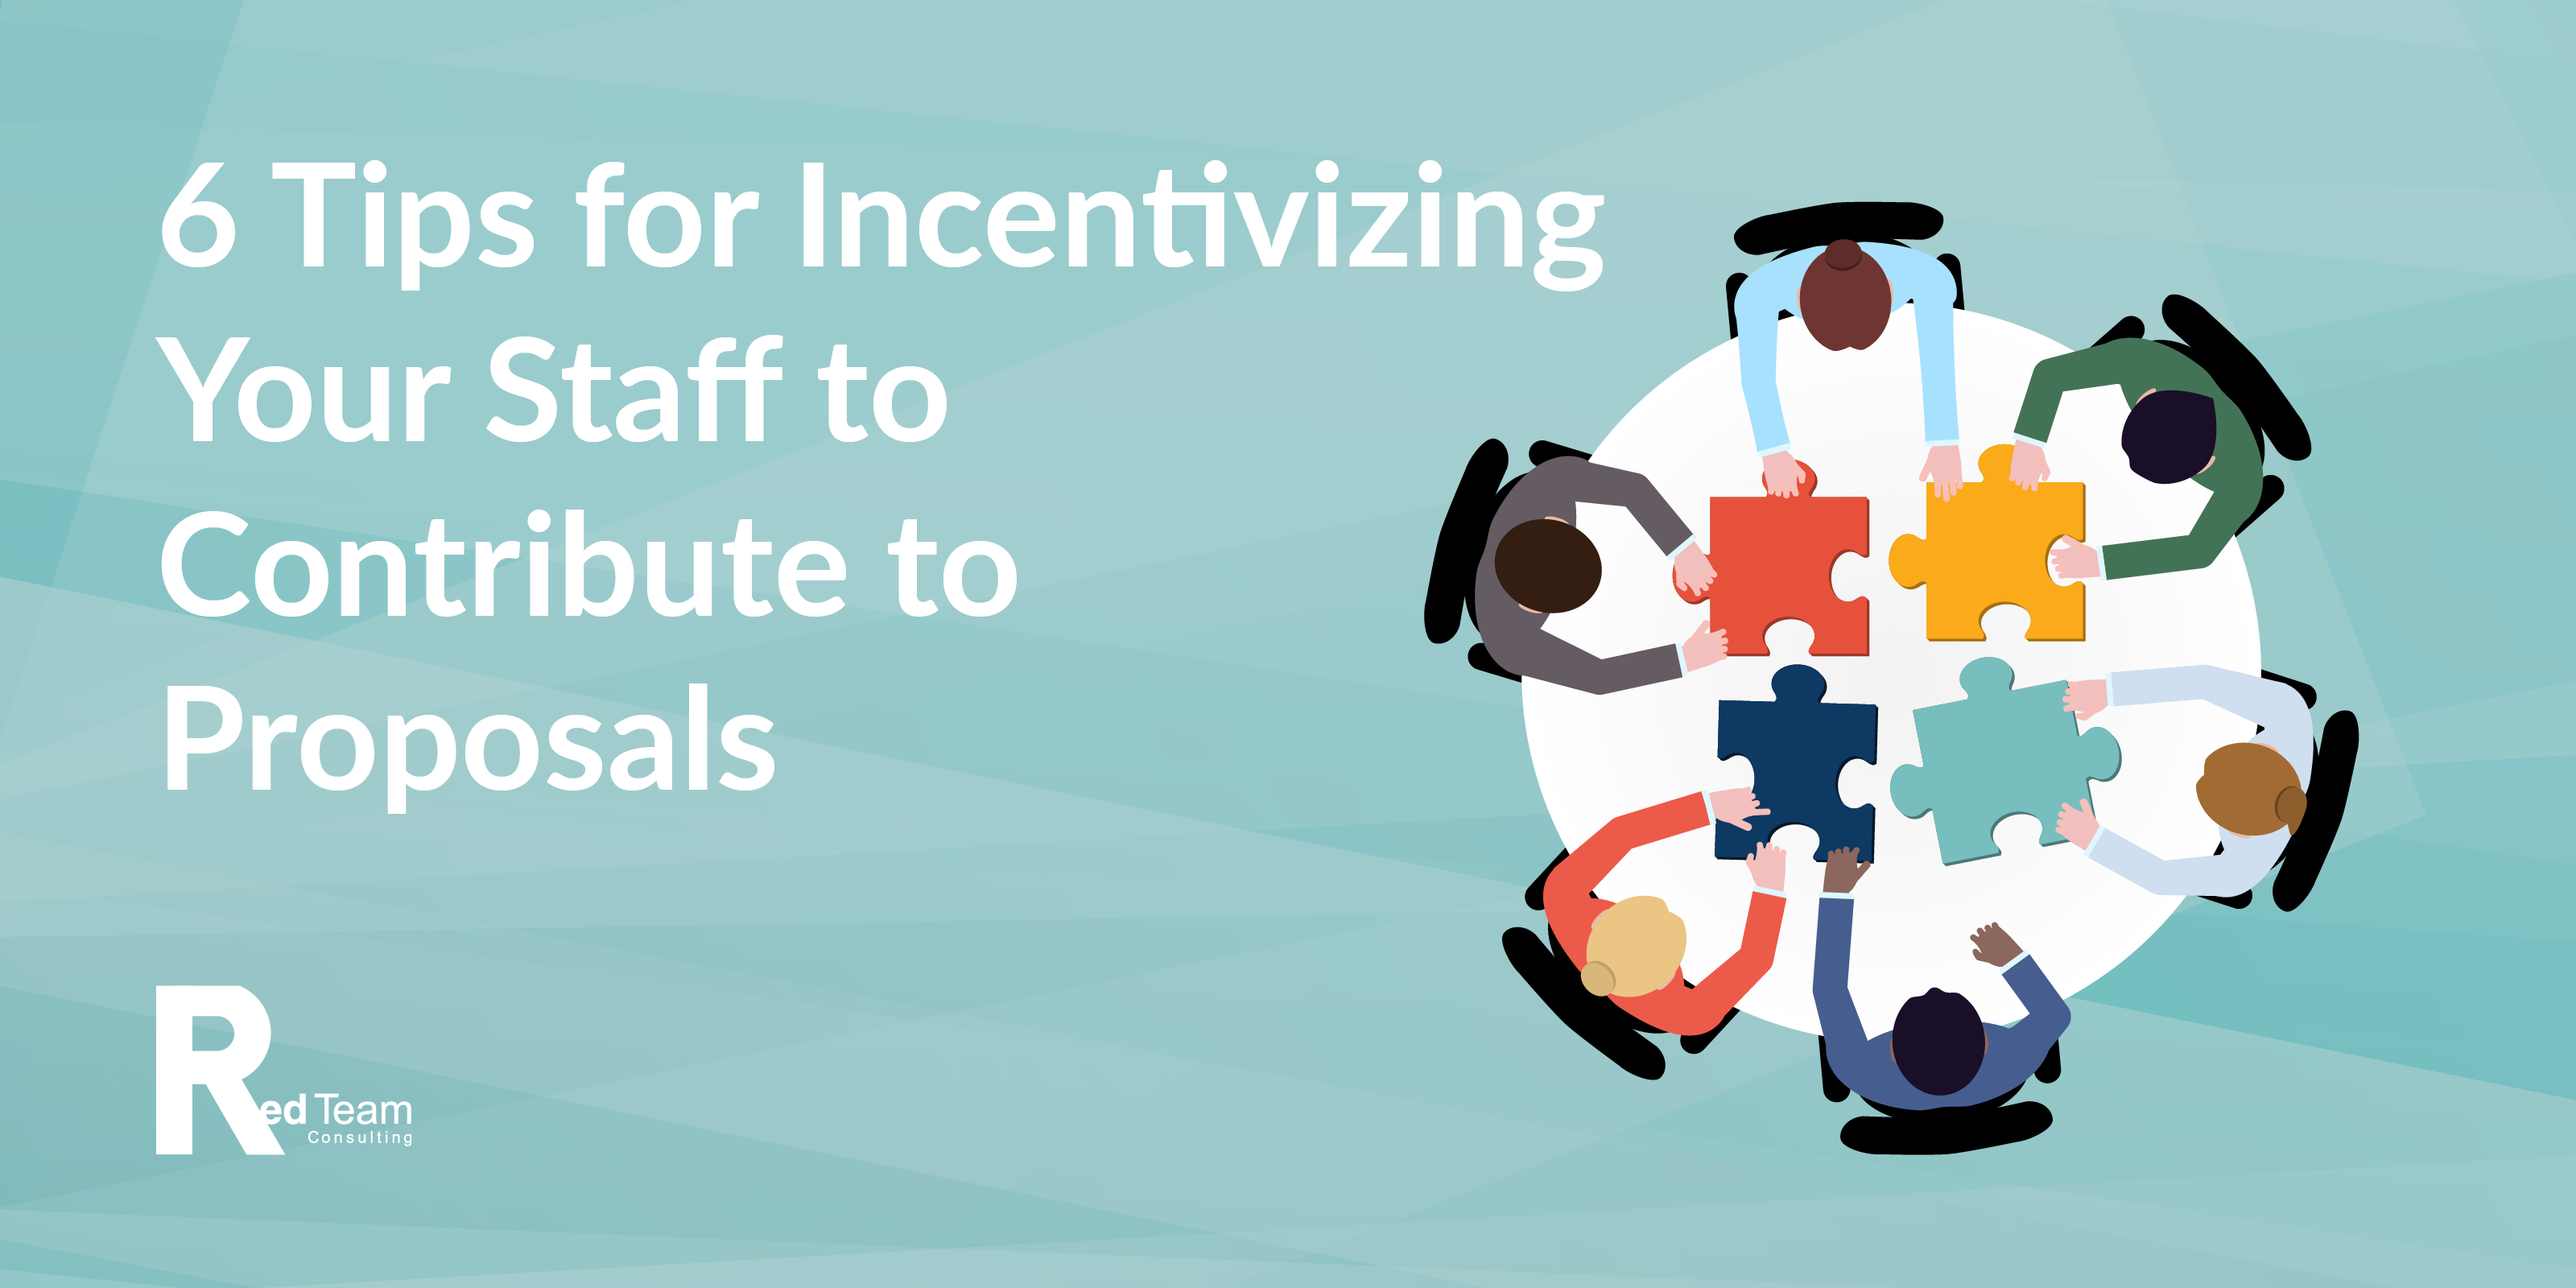 6 Tips for Incentivizing Your Staff to Contribute to Proposals